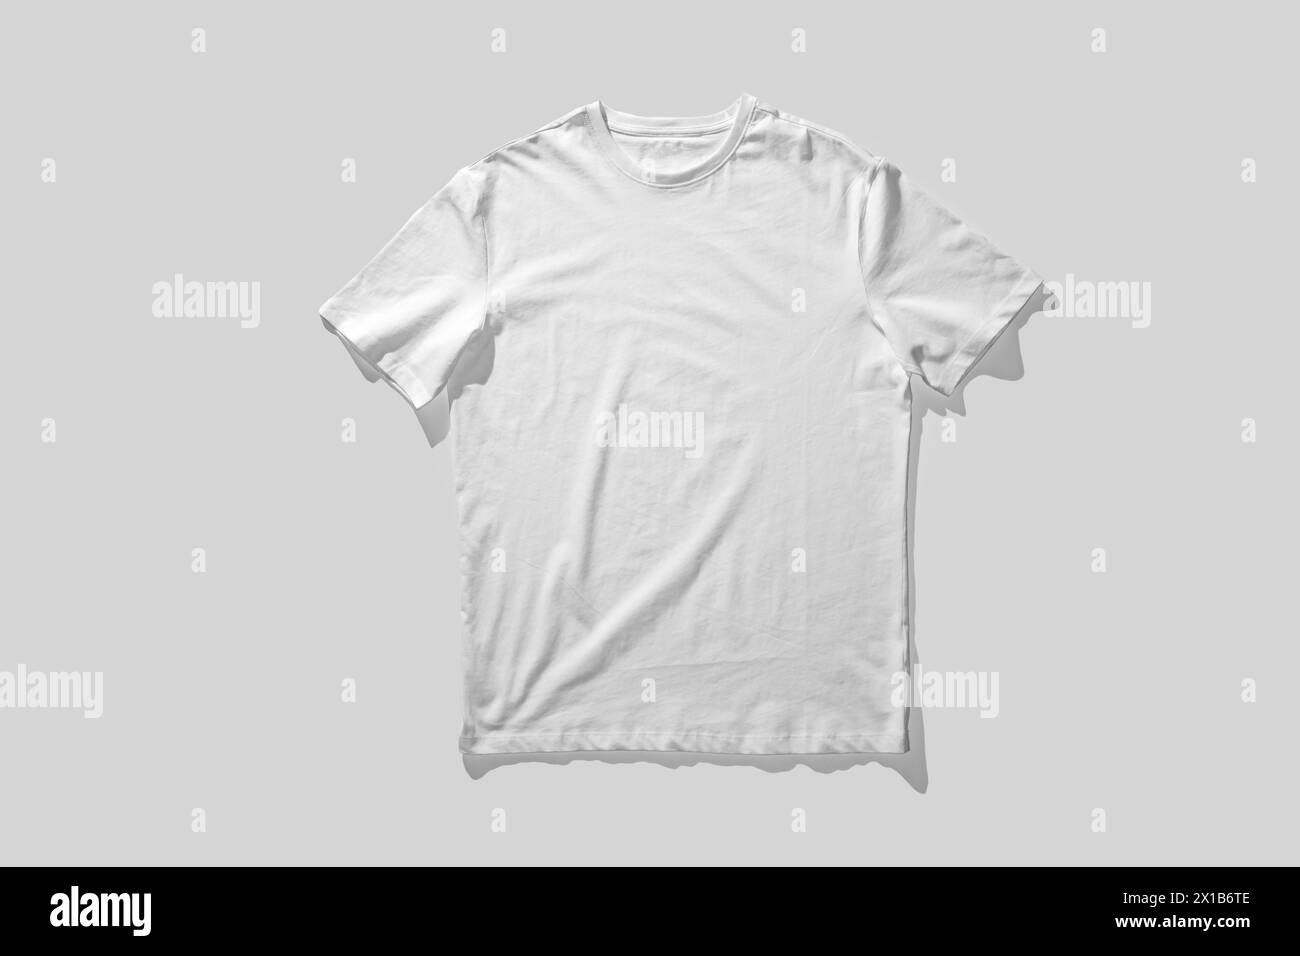 Plain White T-Shirt Laid Flat Against a Solid Gray Background Stock Photo